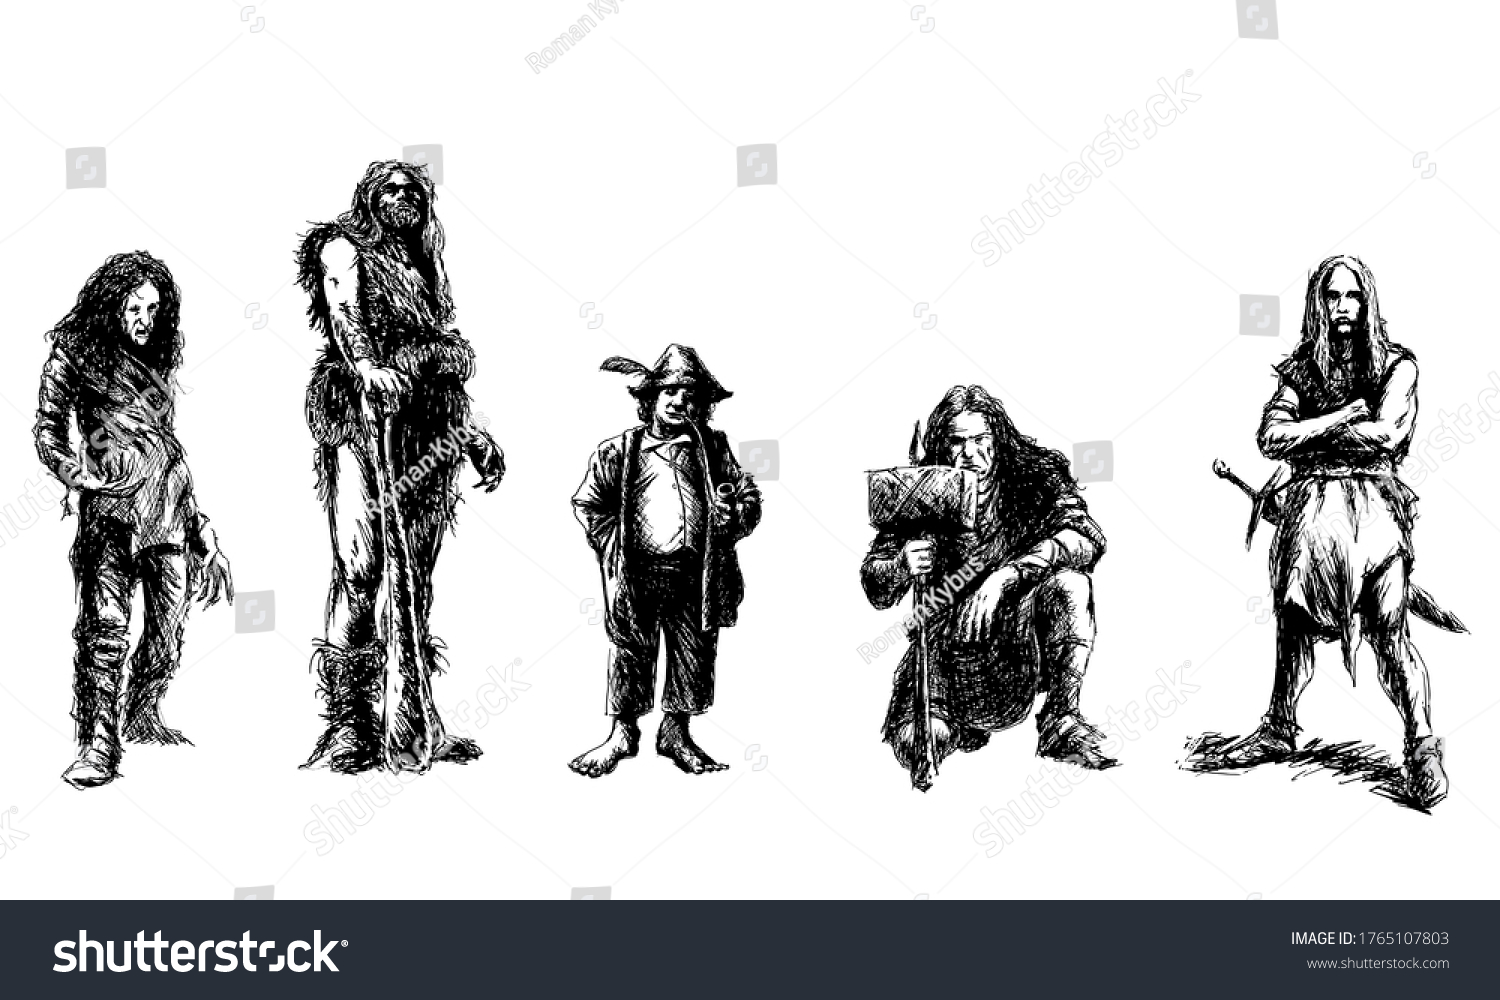 SVG of set of fantasy characters - black and white vector illustration svg